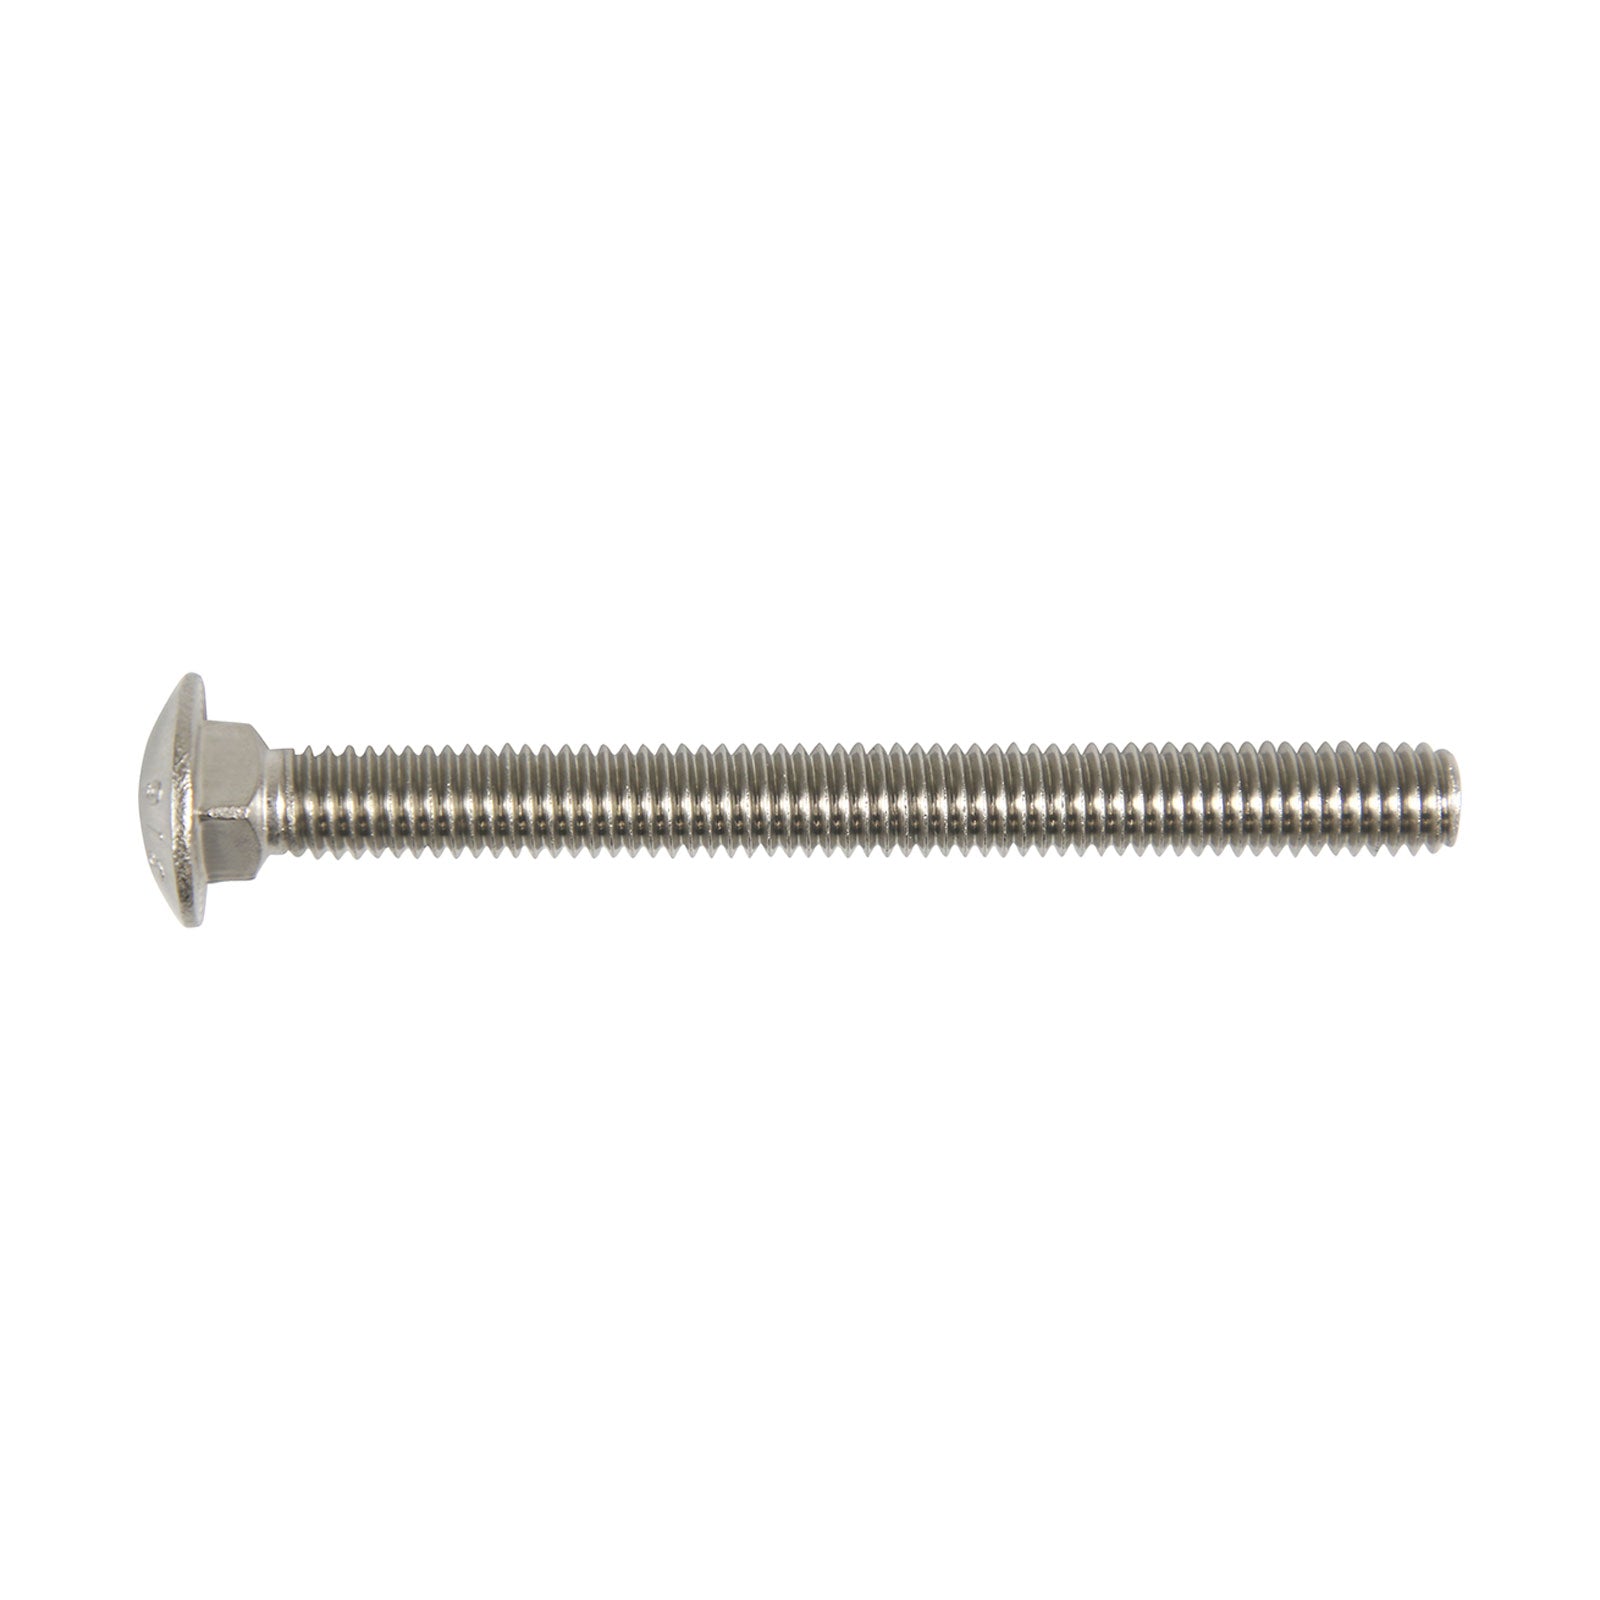 3/8"-16 x 4" Conquest Carriage Bolt - 316 Stainless Steel